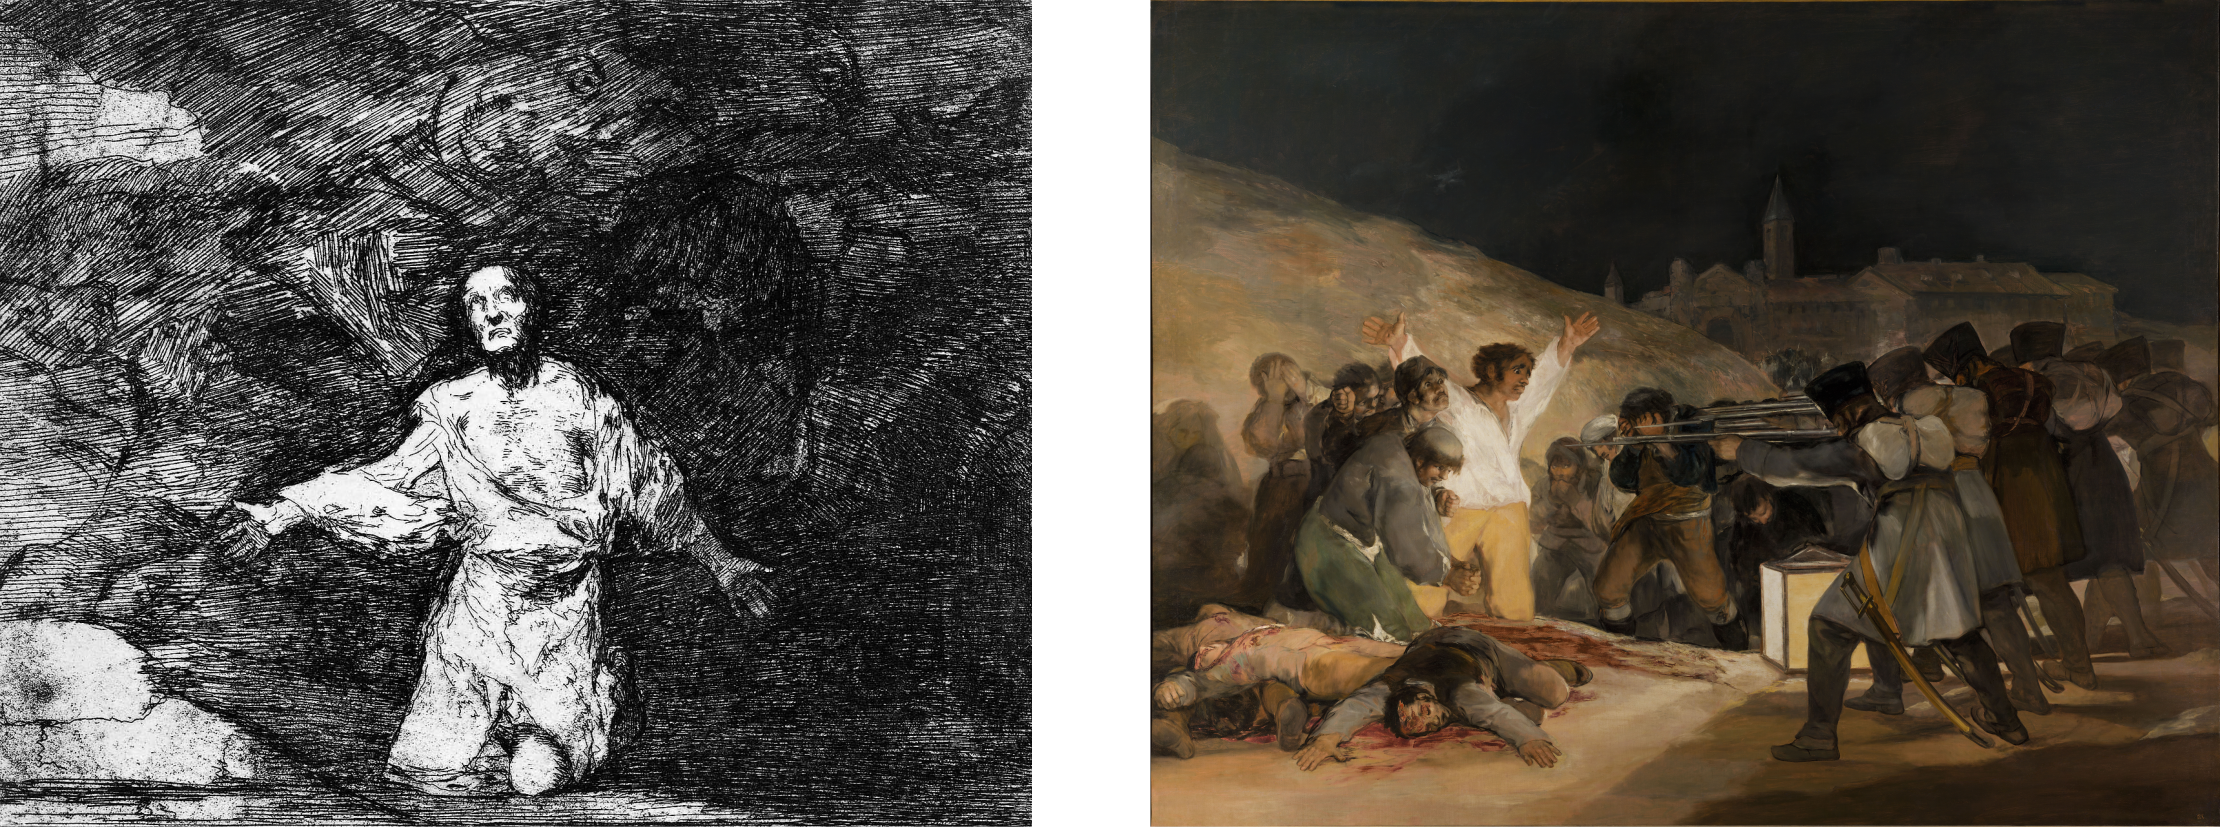  Francisco Goya, 'Sad Forebodings of What is to Come', in: 'Disasters of War' and 'The Third of May 1808'